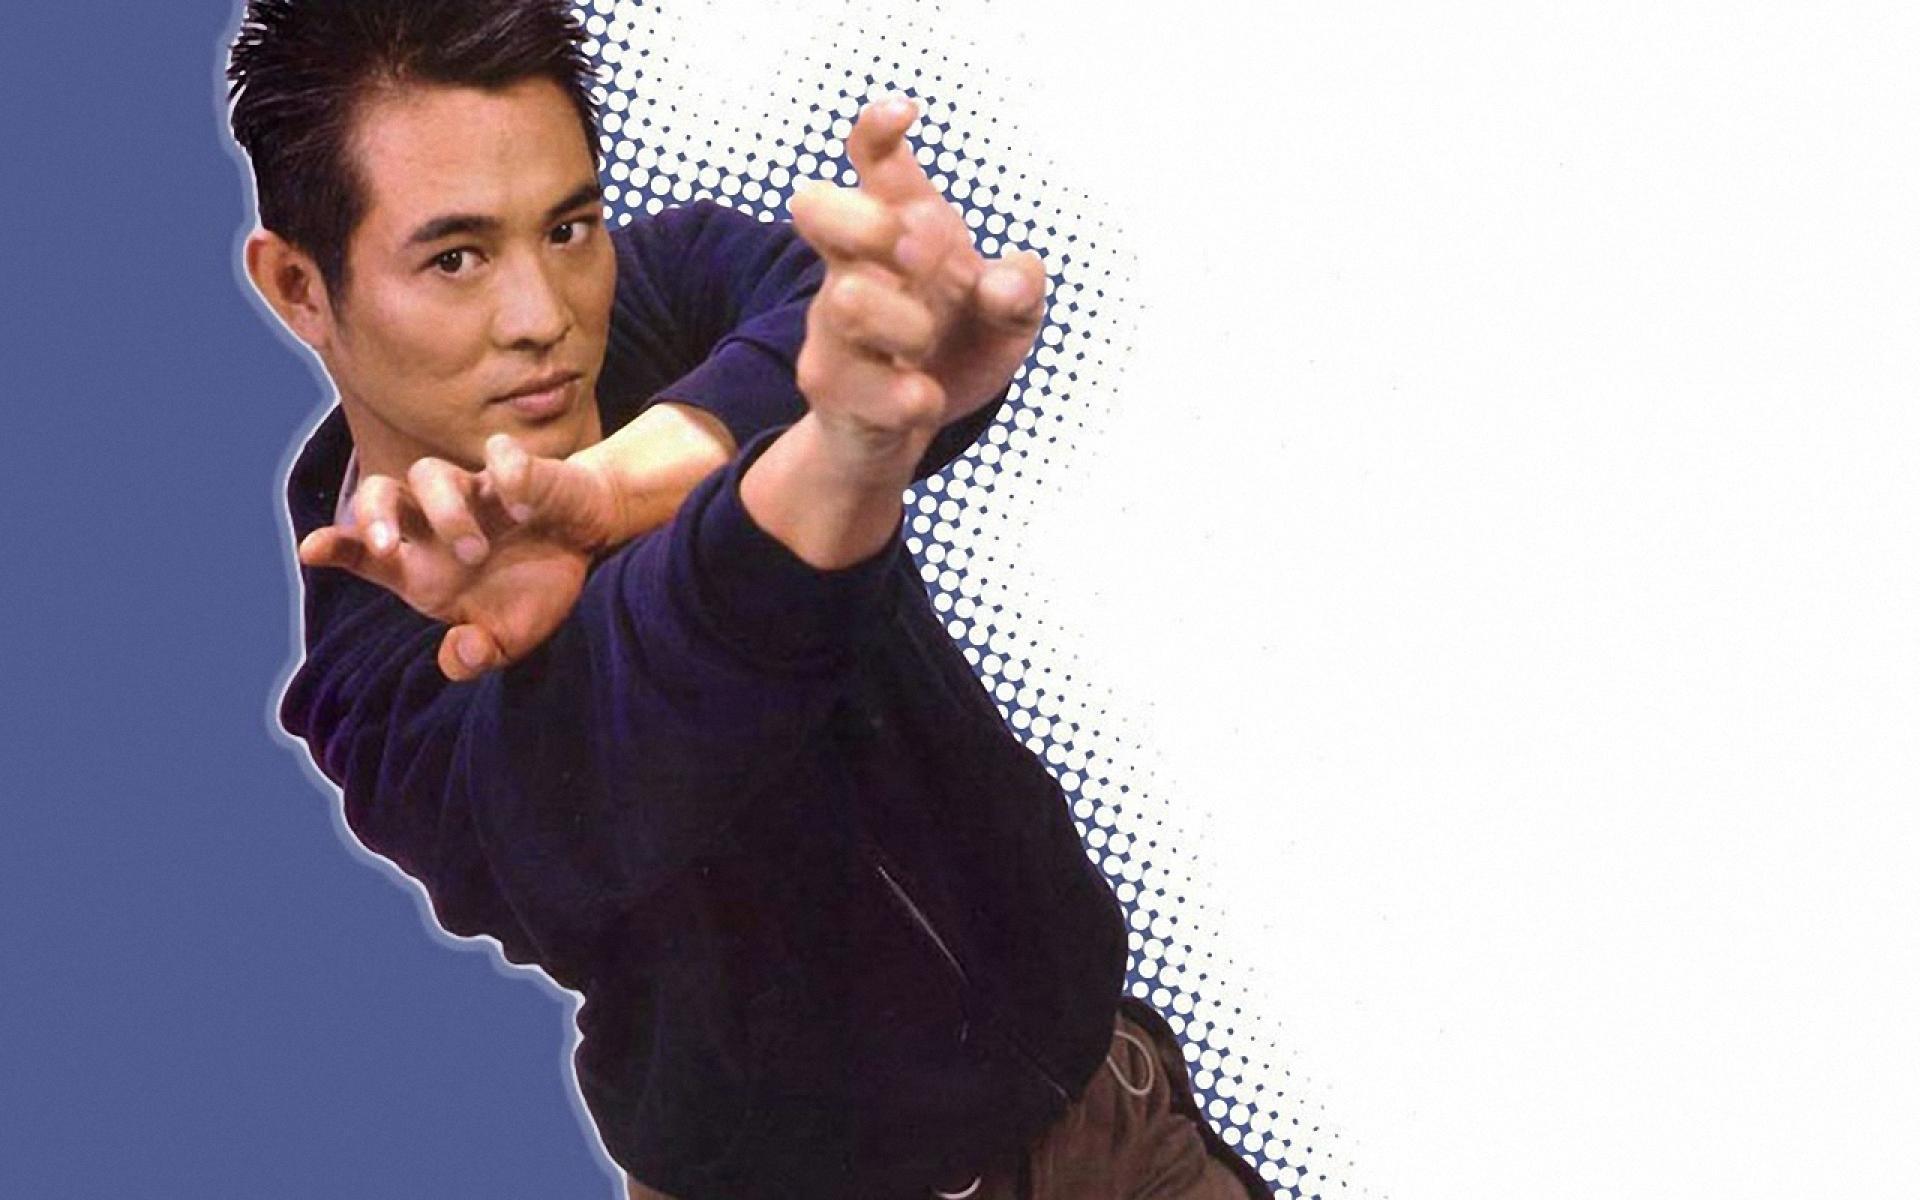 Jet Li Wallpapers Images Photos Pictures Backgrounds